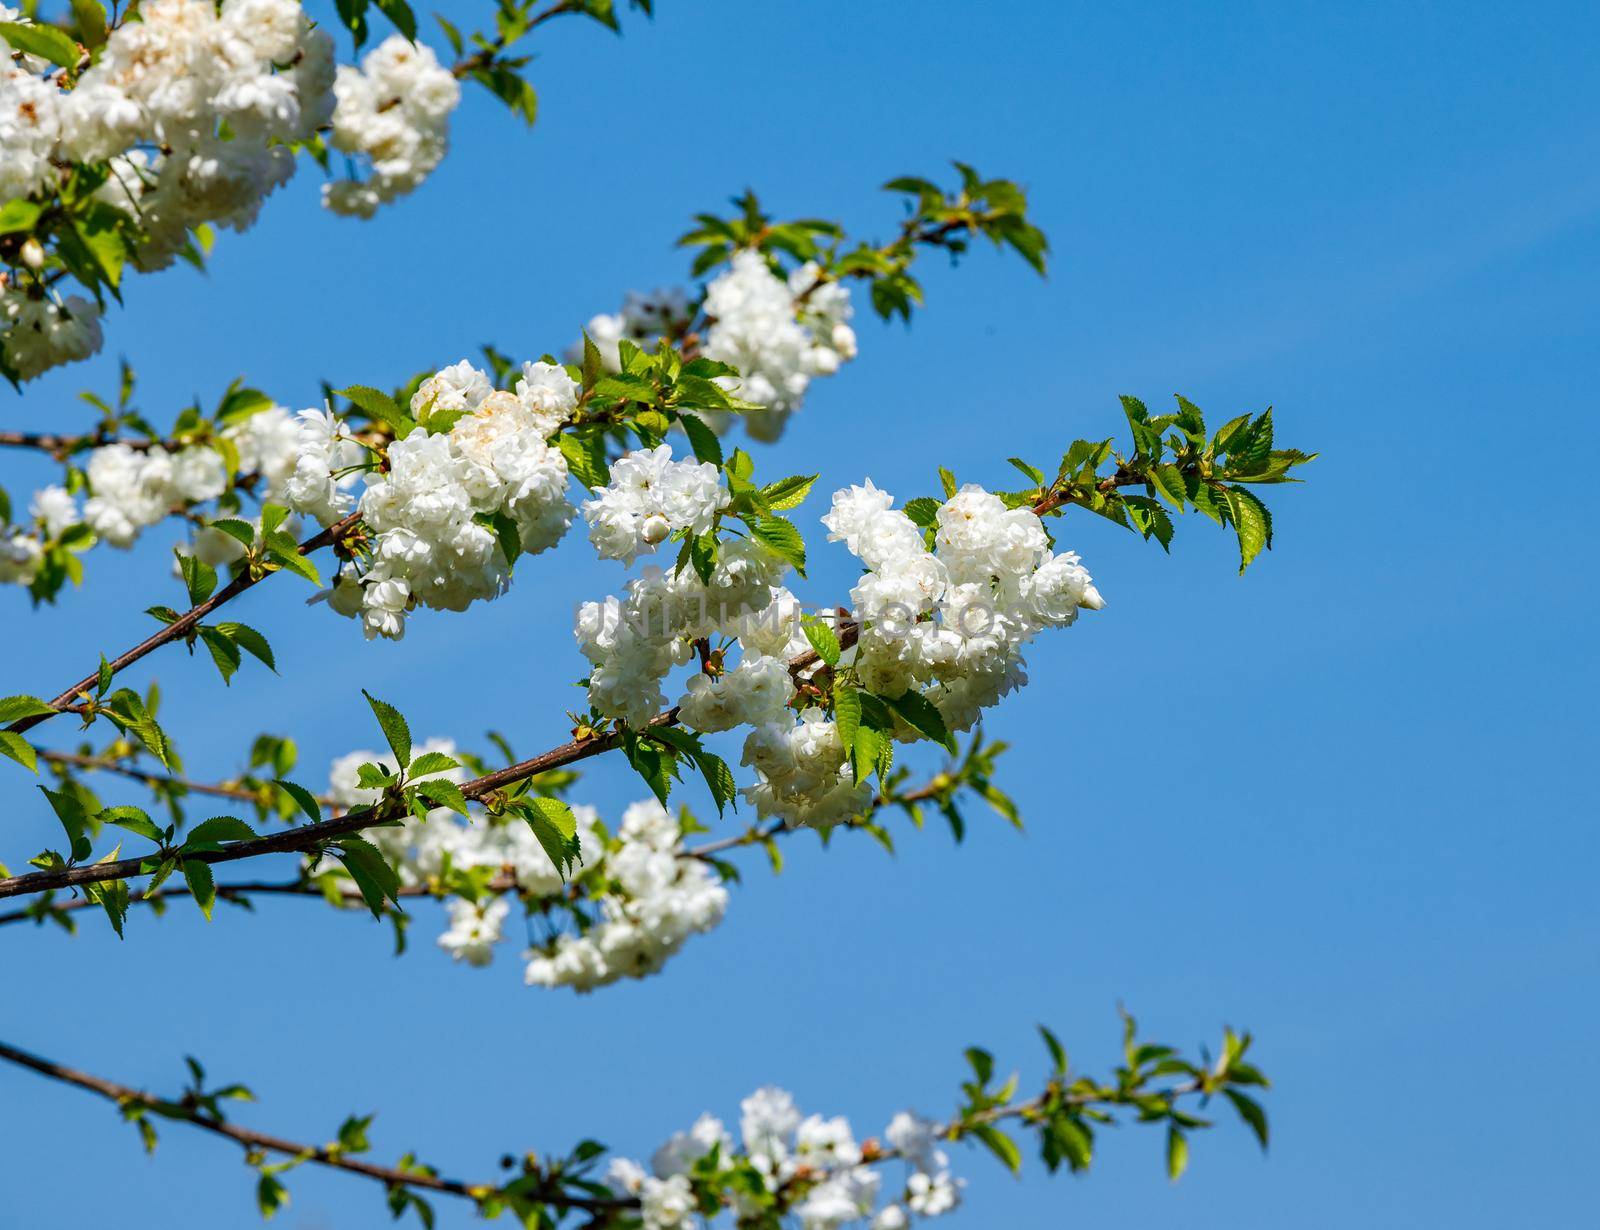 Blooming apple trees with white flowers on a background of blue sky, branches with green petals